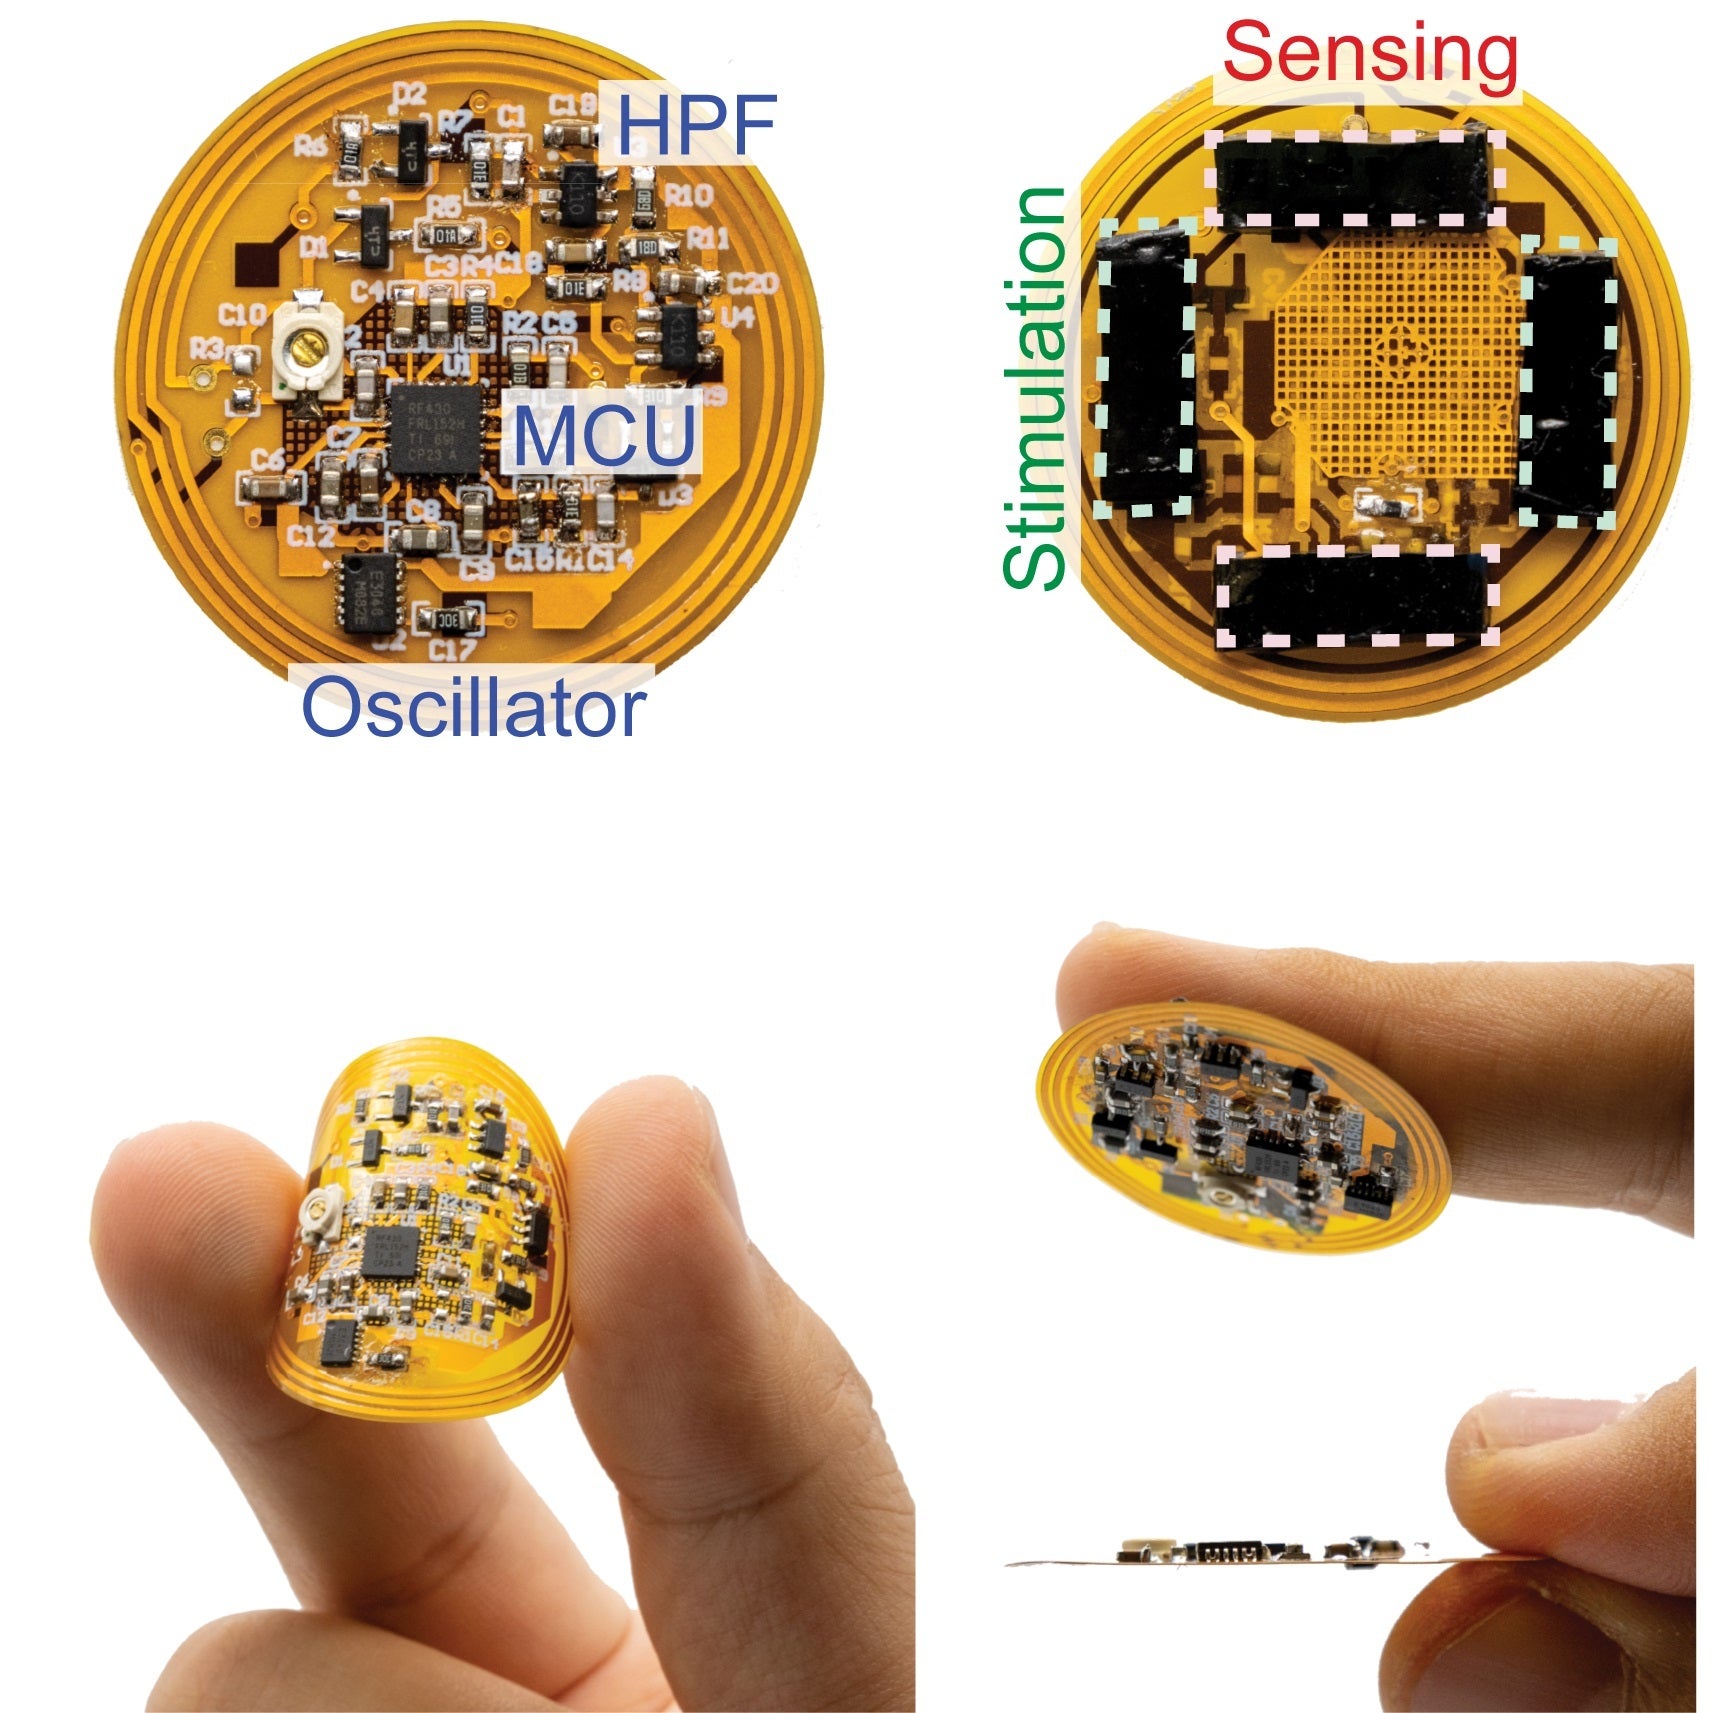 Photographs of the smart bandage showing the microcontroller unit (MCU), crystal oscillator, high-pass filter (HPF), stimulation and sensing electrodes, flexibility of the printed circuit board, adhesion of the hydrogel interface to skin, and thin layout of the board.